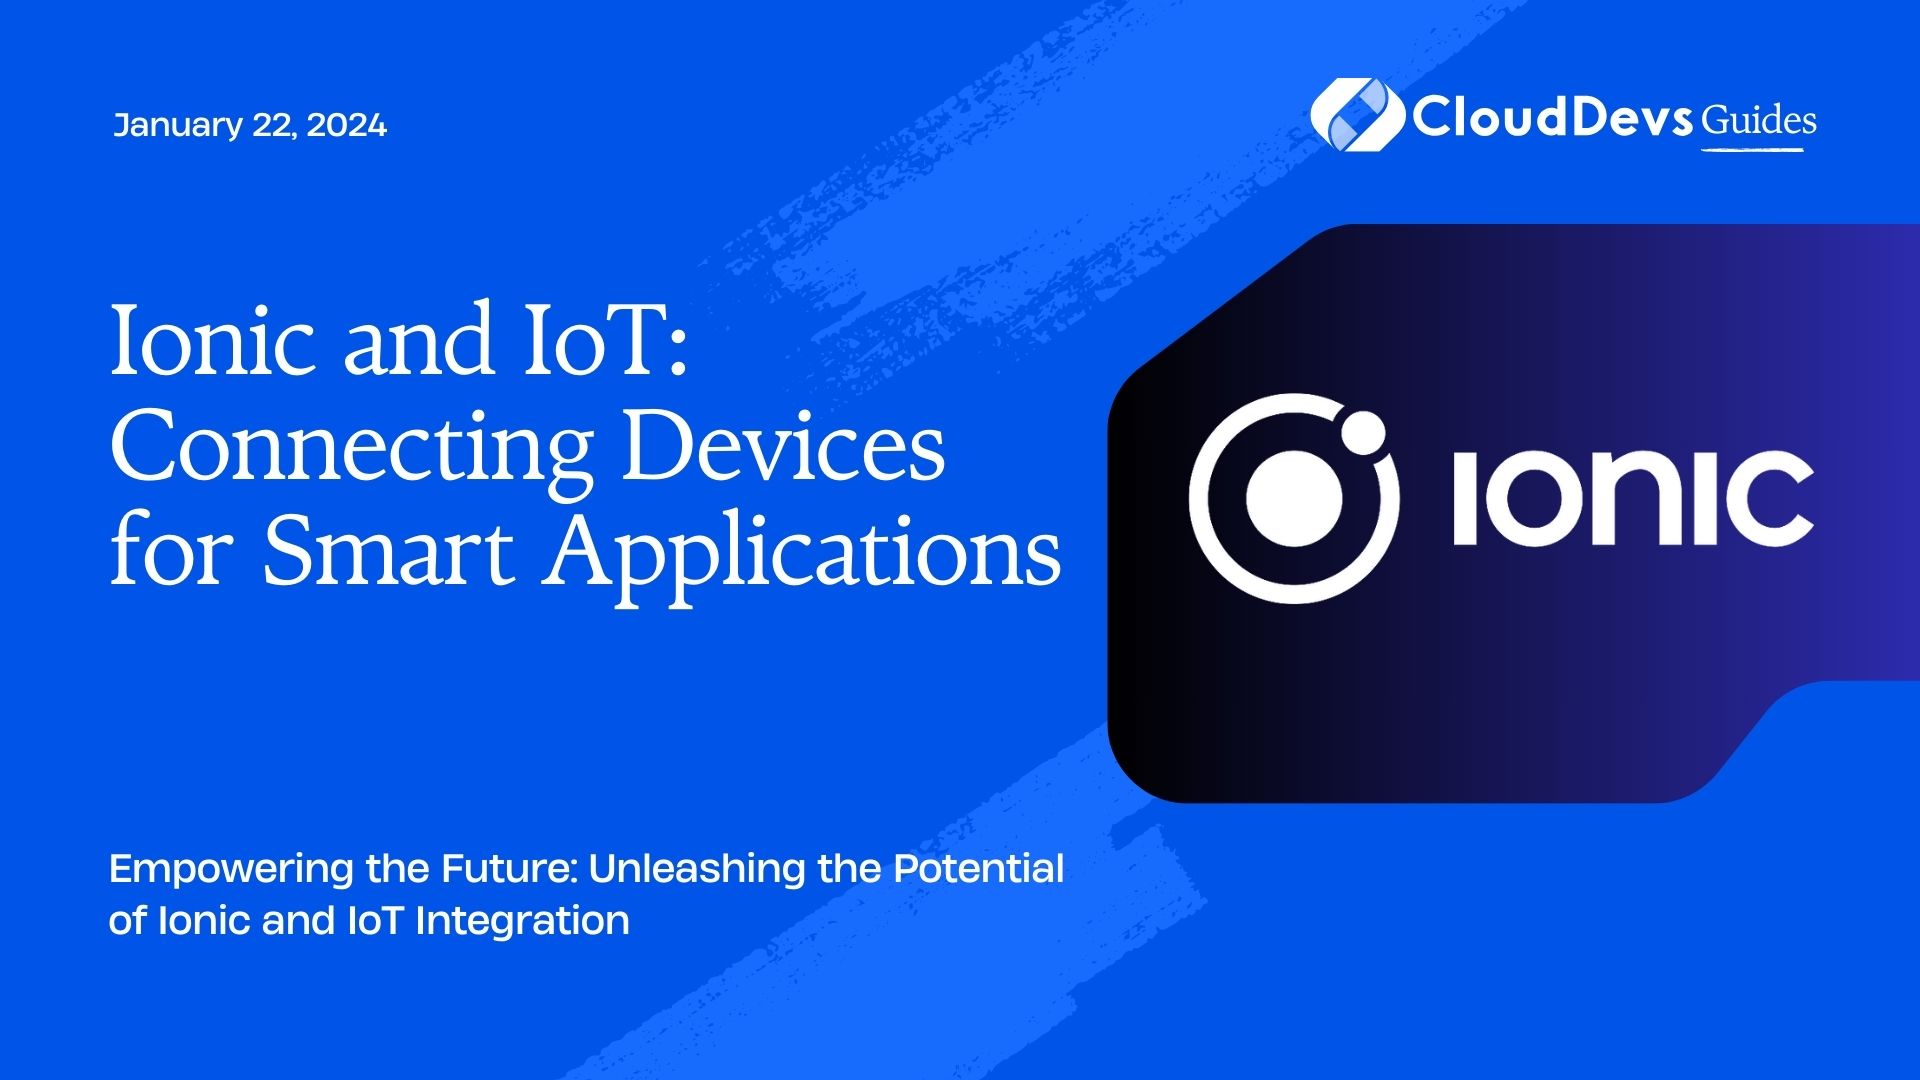 Ionic and IoT: Connecting Devices for Smart Applications